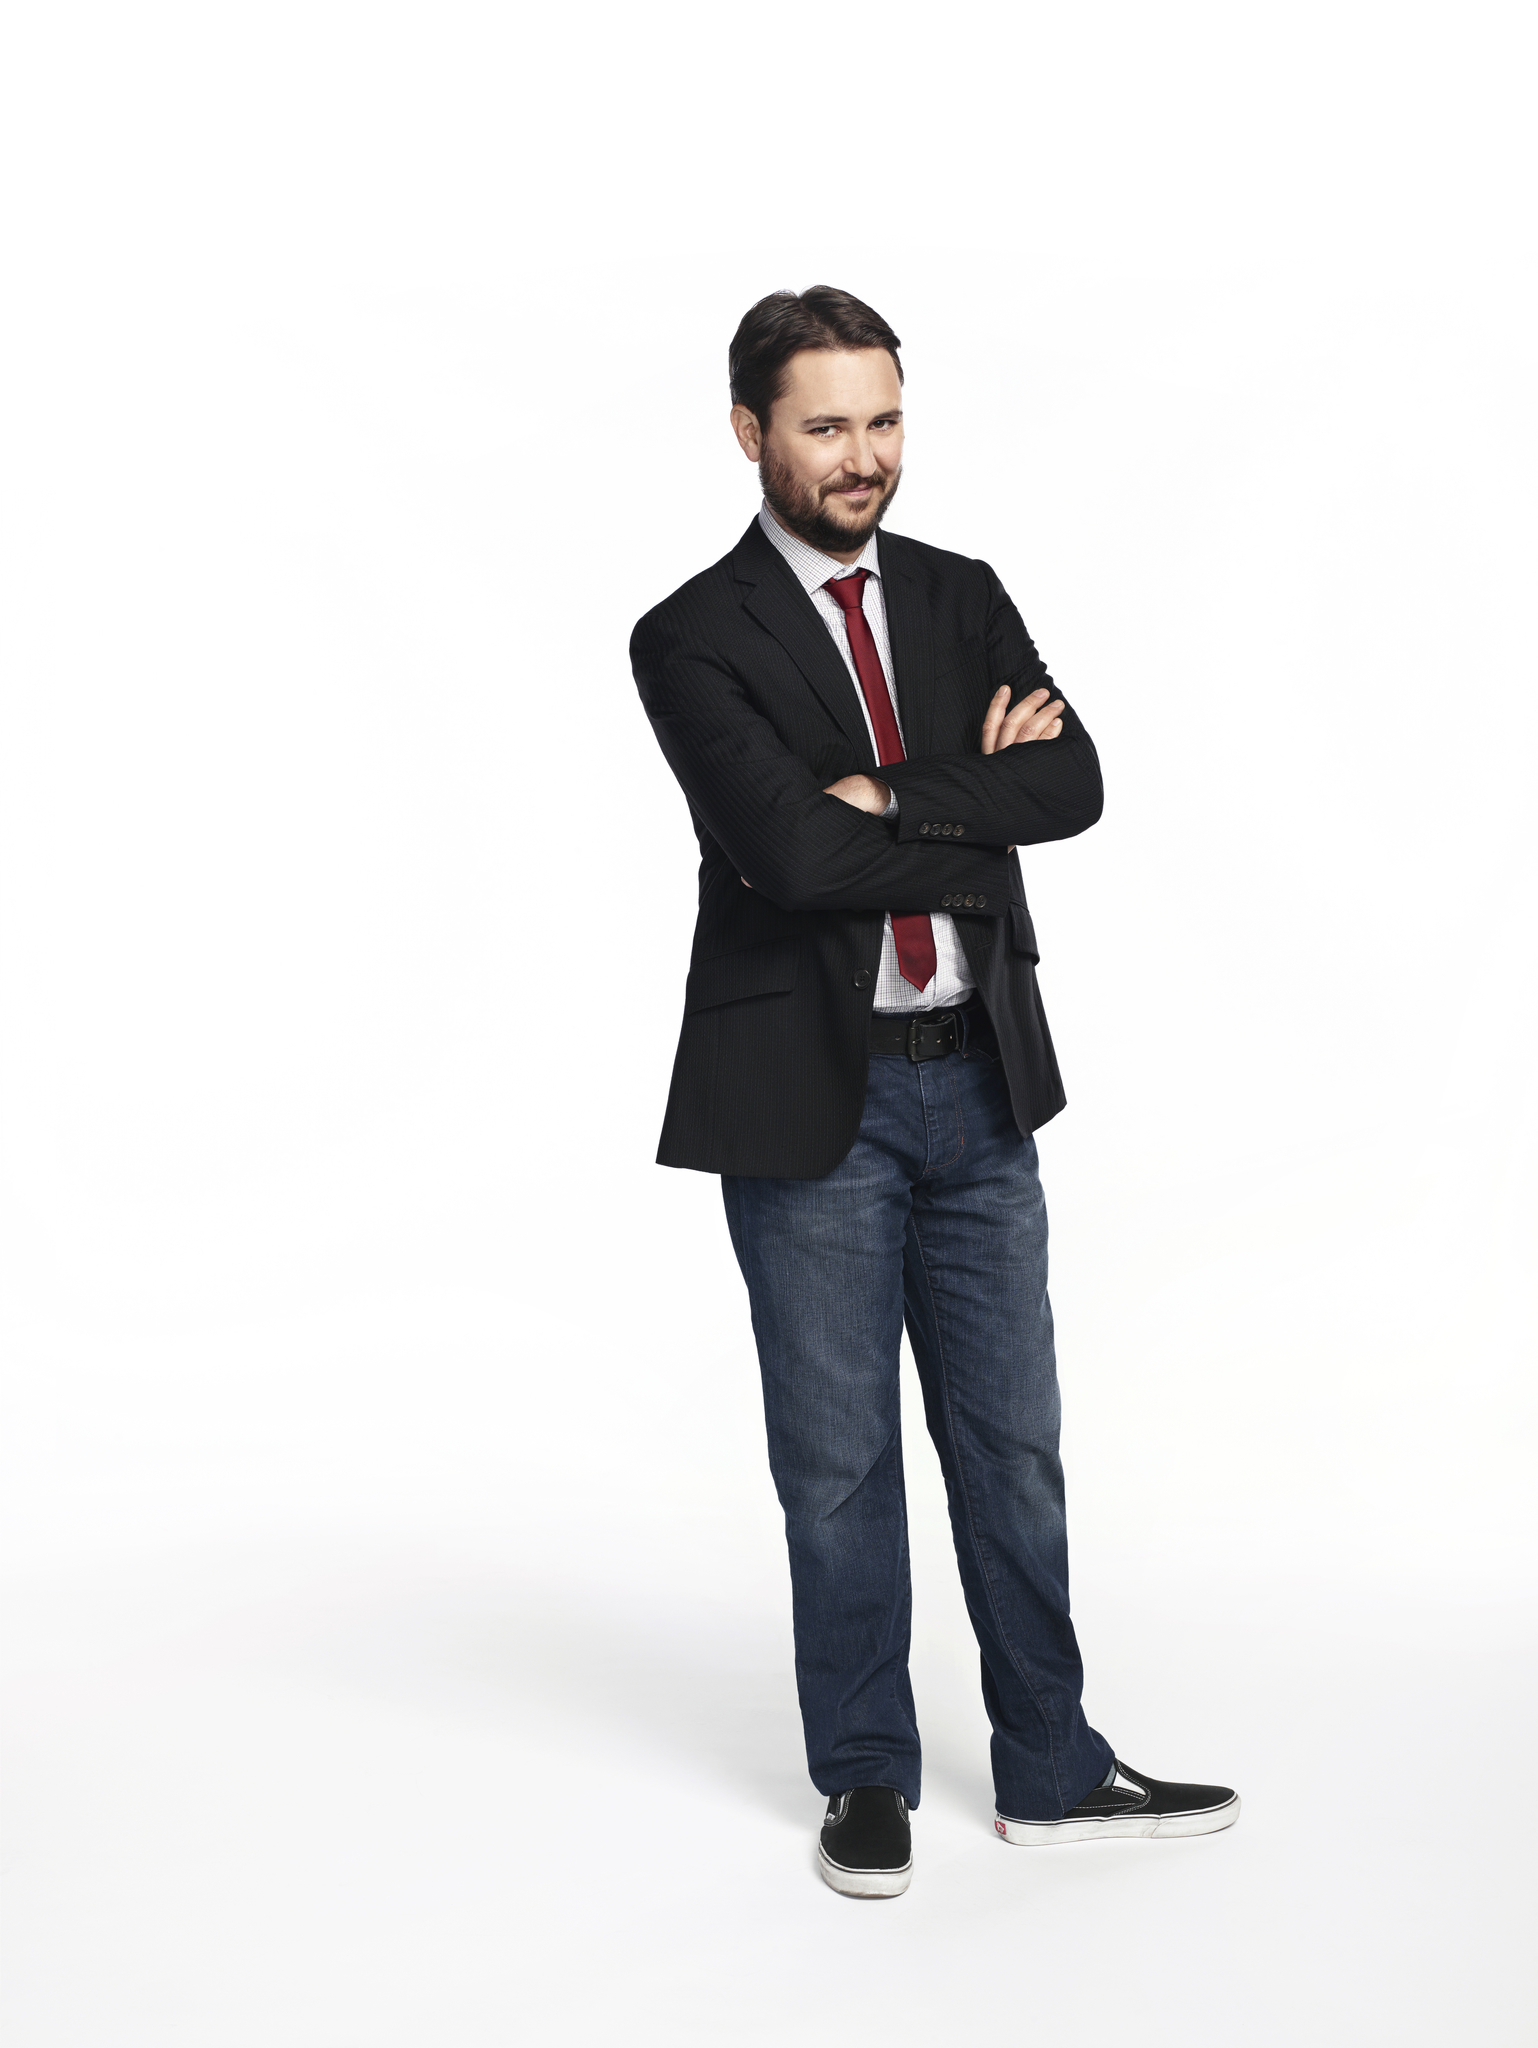 Still of Wil Wheaton in The Wil Wheaton Project (2014)